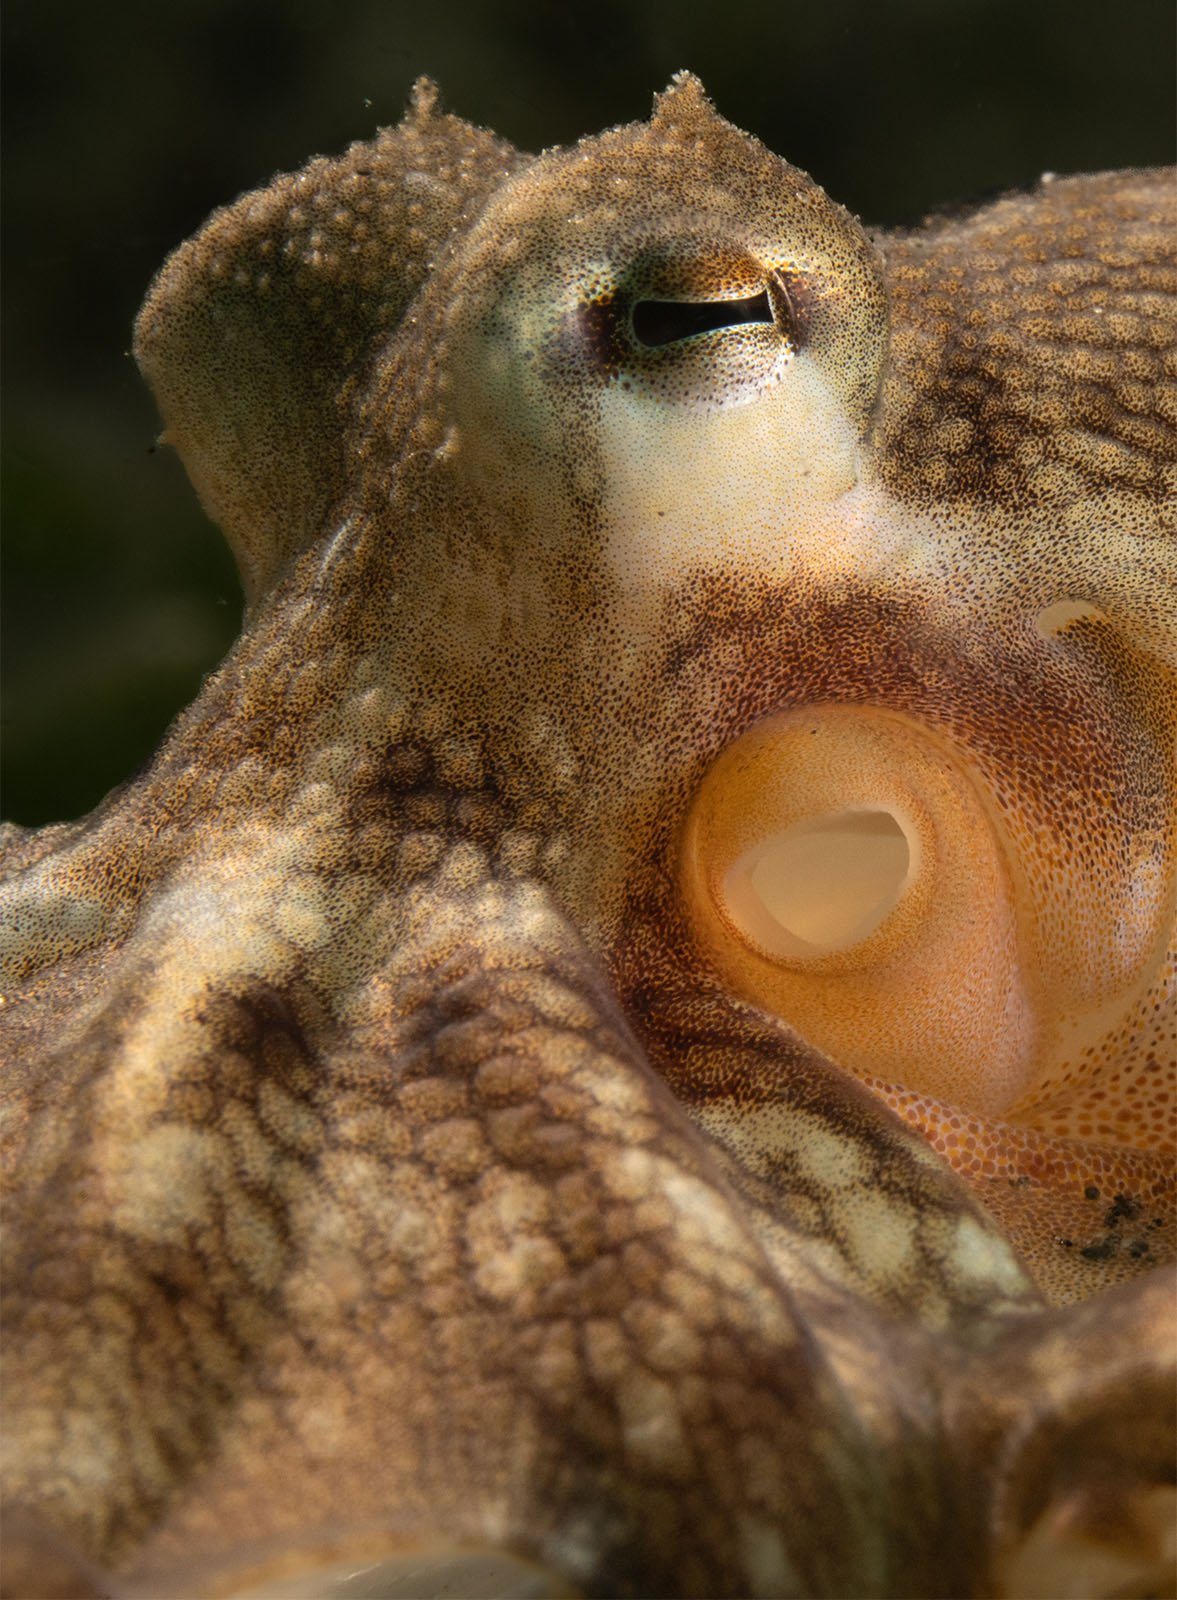 Close-up of an octopus showing detailed texture on its skin, focusing on its eye and siphon, against a dark background.